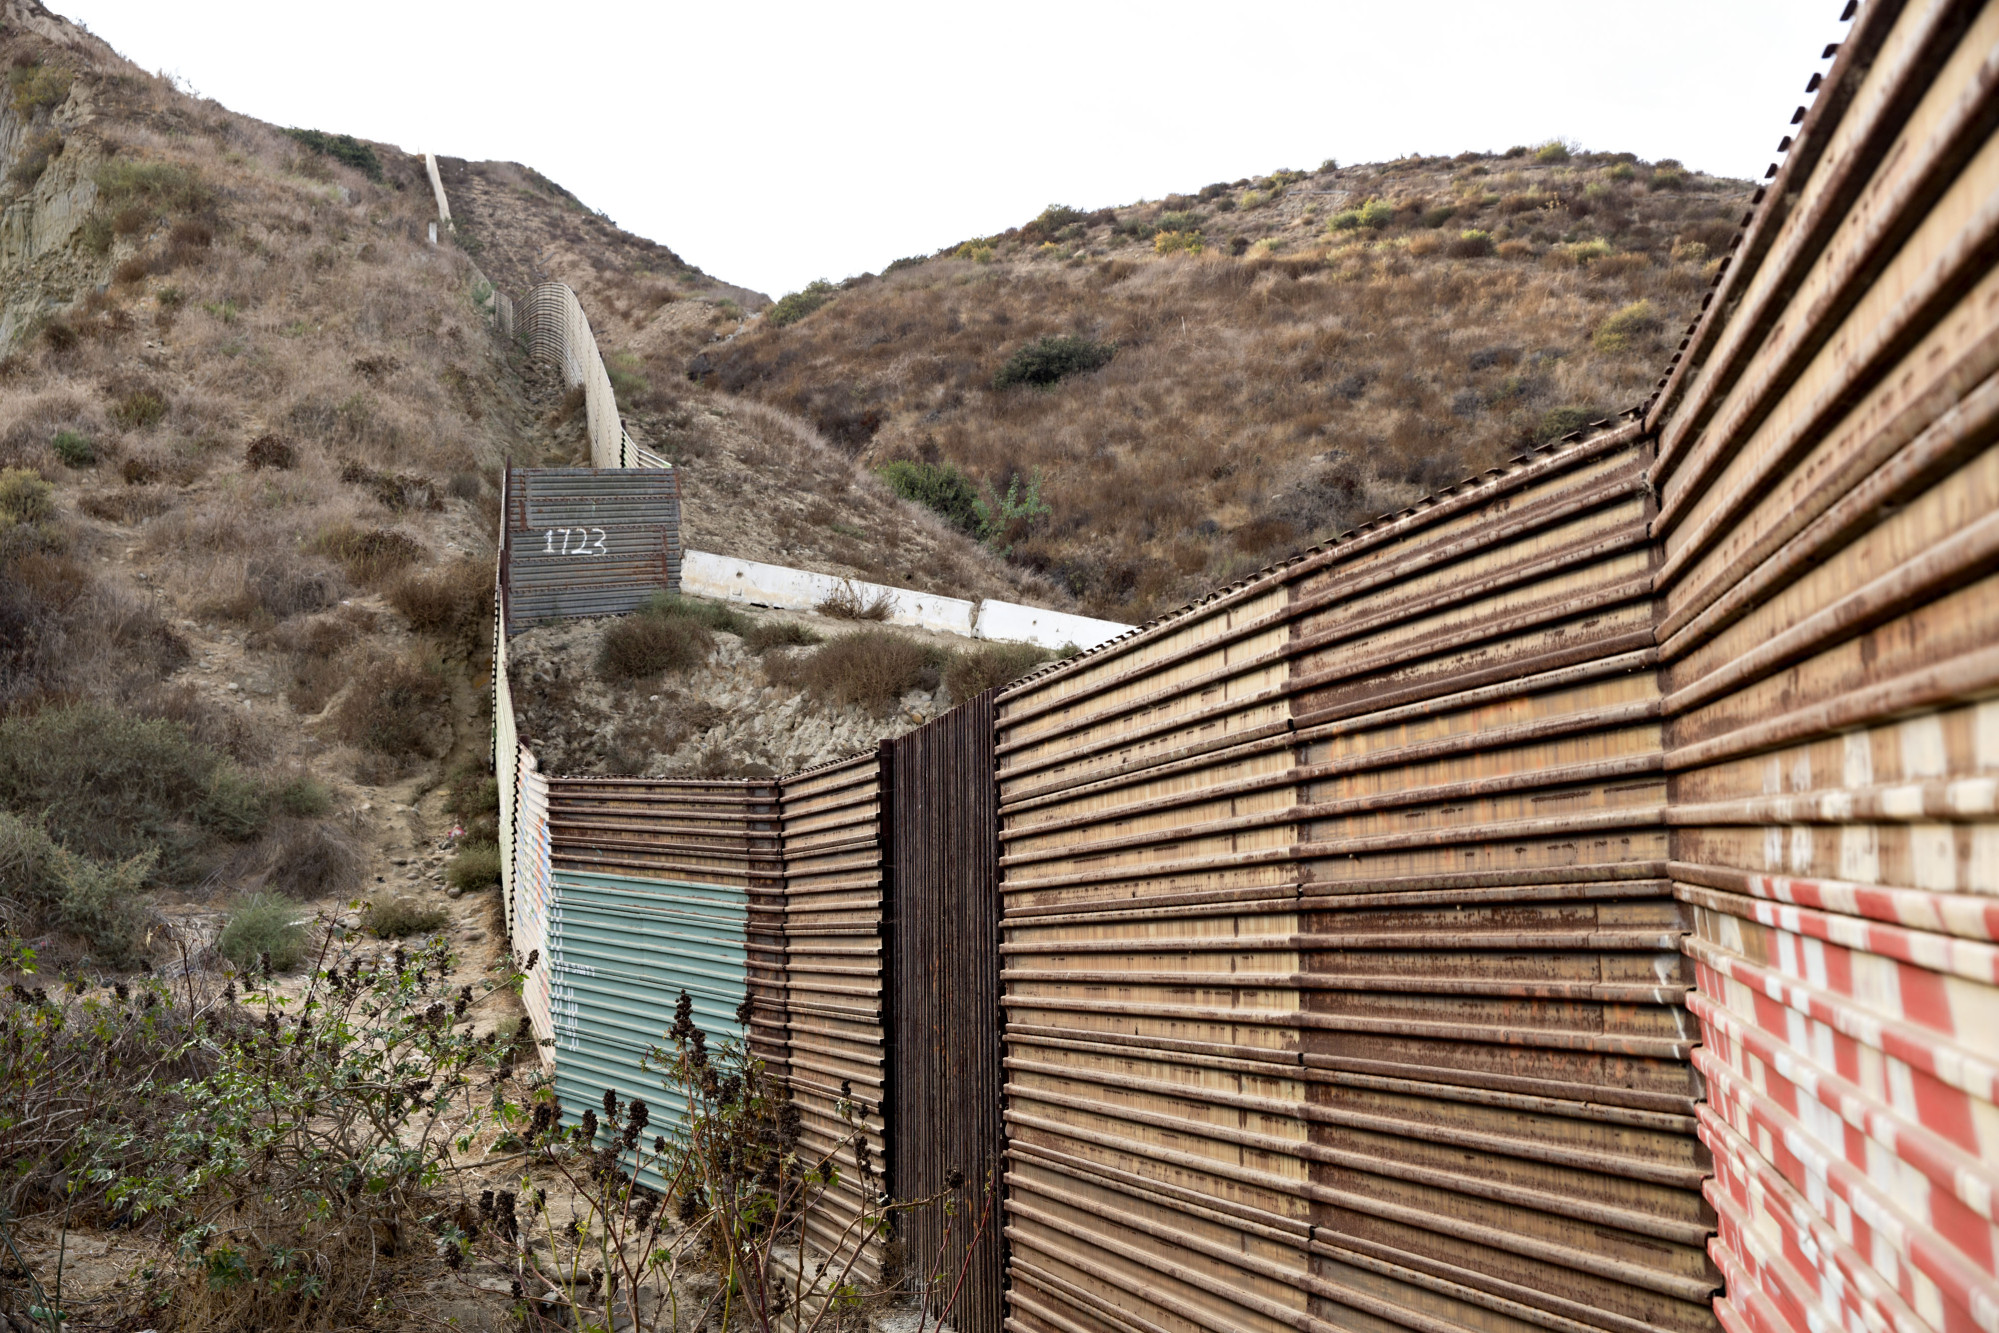 A border fence stands along the U.S.-Mexico border in Tijuana, on Oct. 31, 2017.